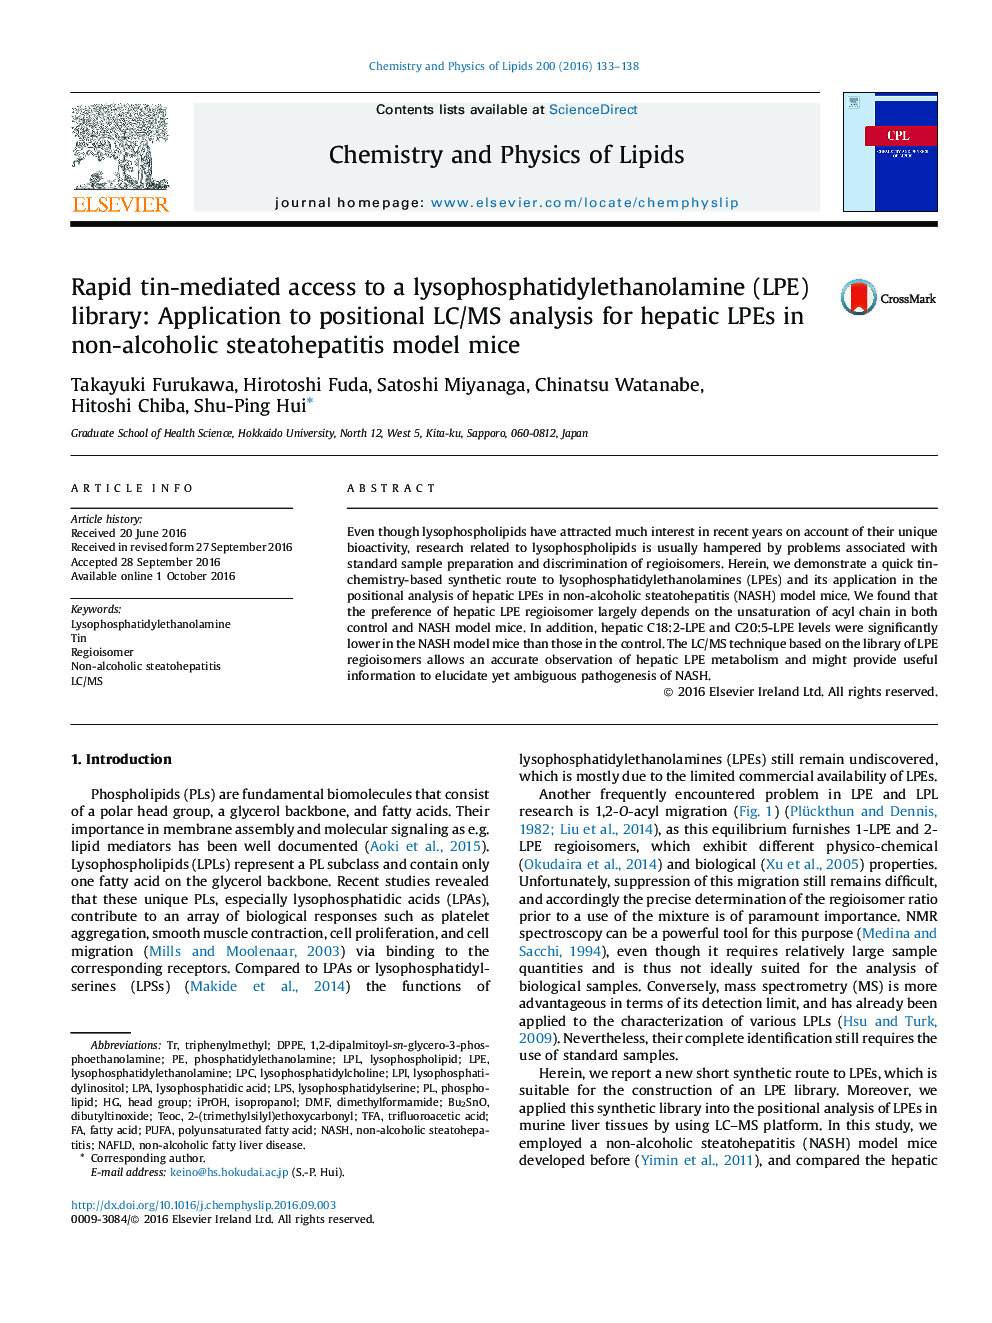 Rapid tin-mediated access to a lysophosphatidylethanolamine (LPE) library: Application to positional LC/MS analysis for hepatic LPEs in non-alcoholic steatohepatitis model mice